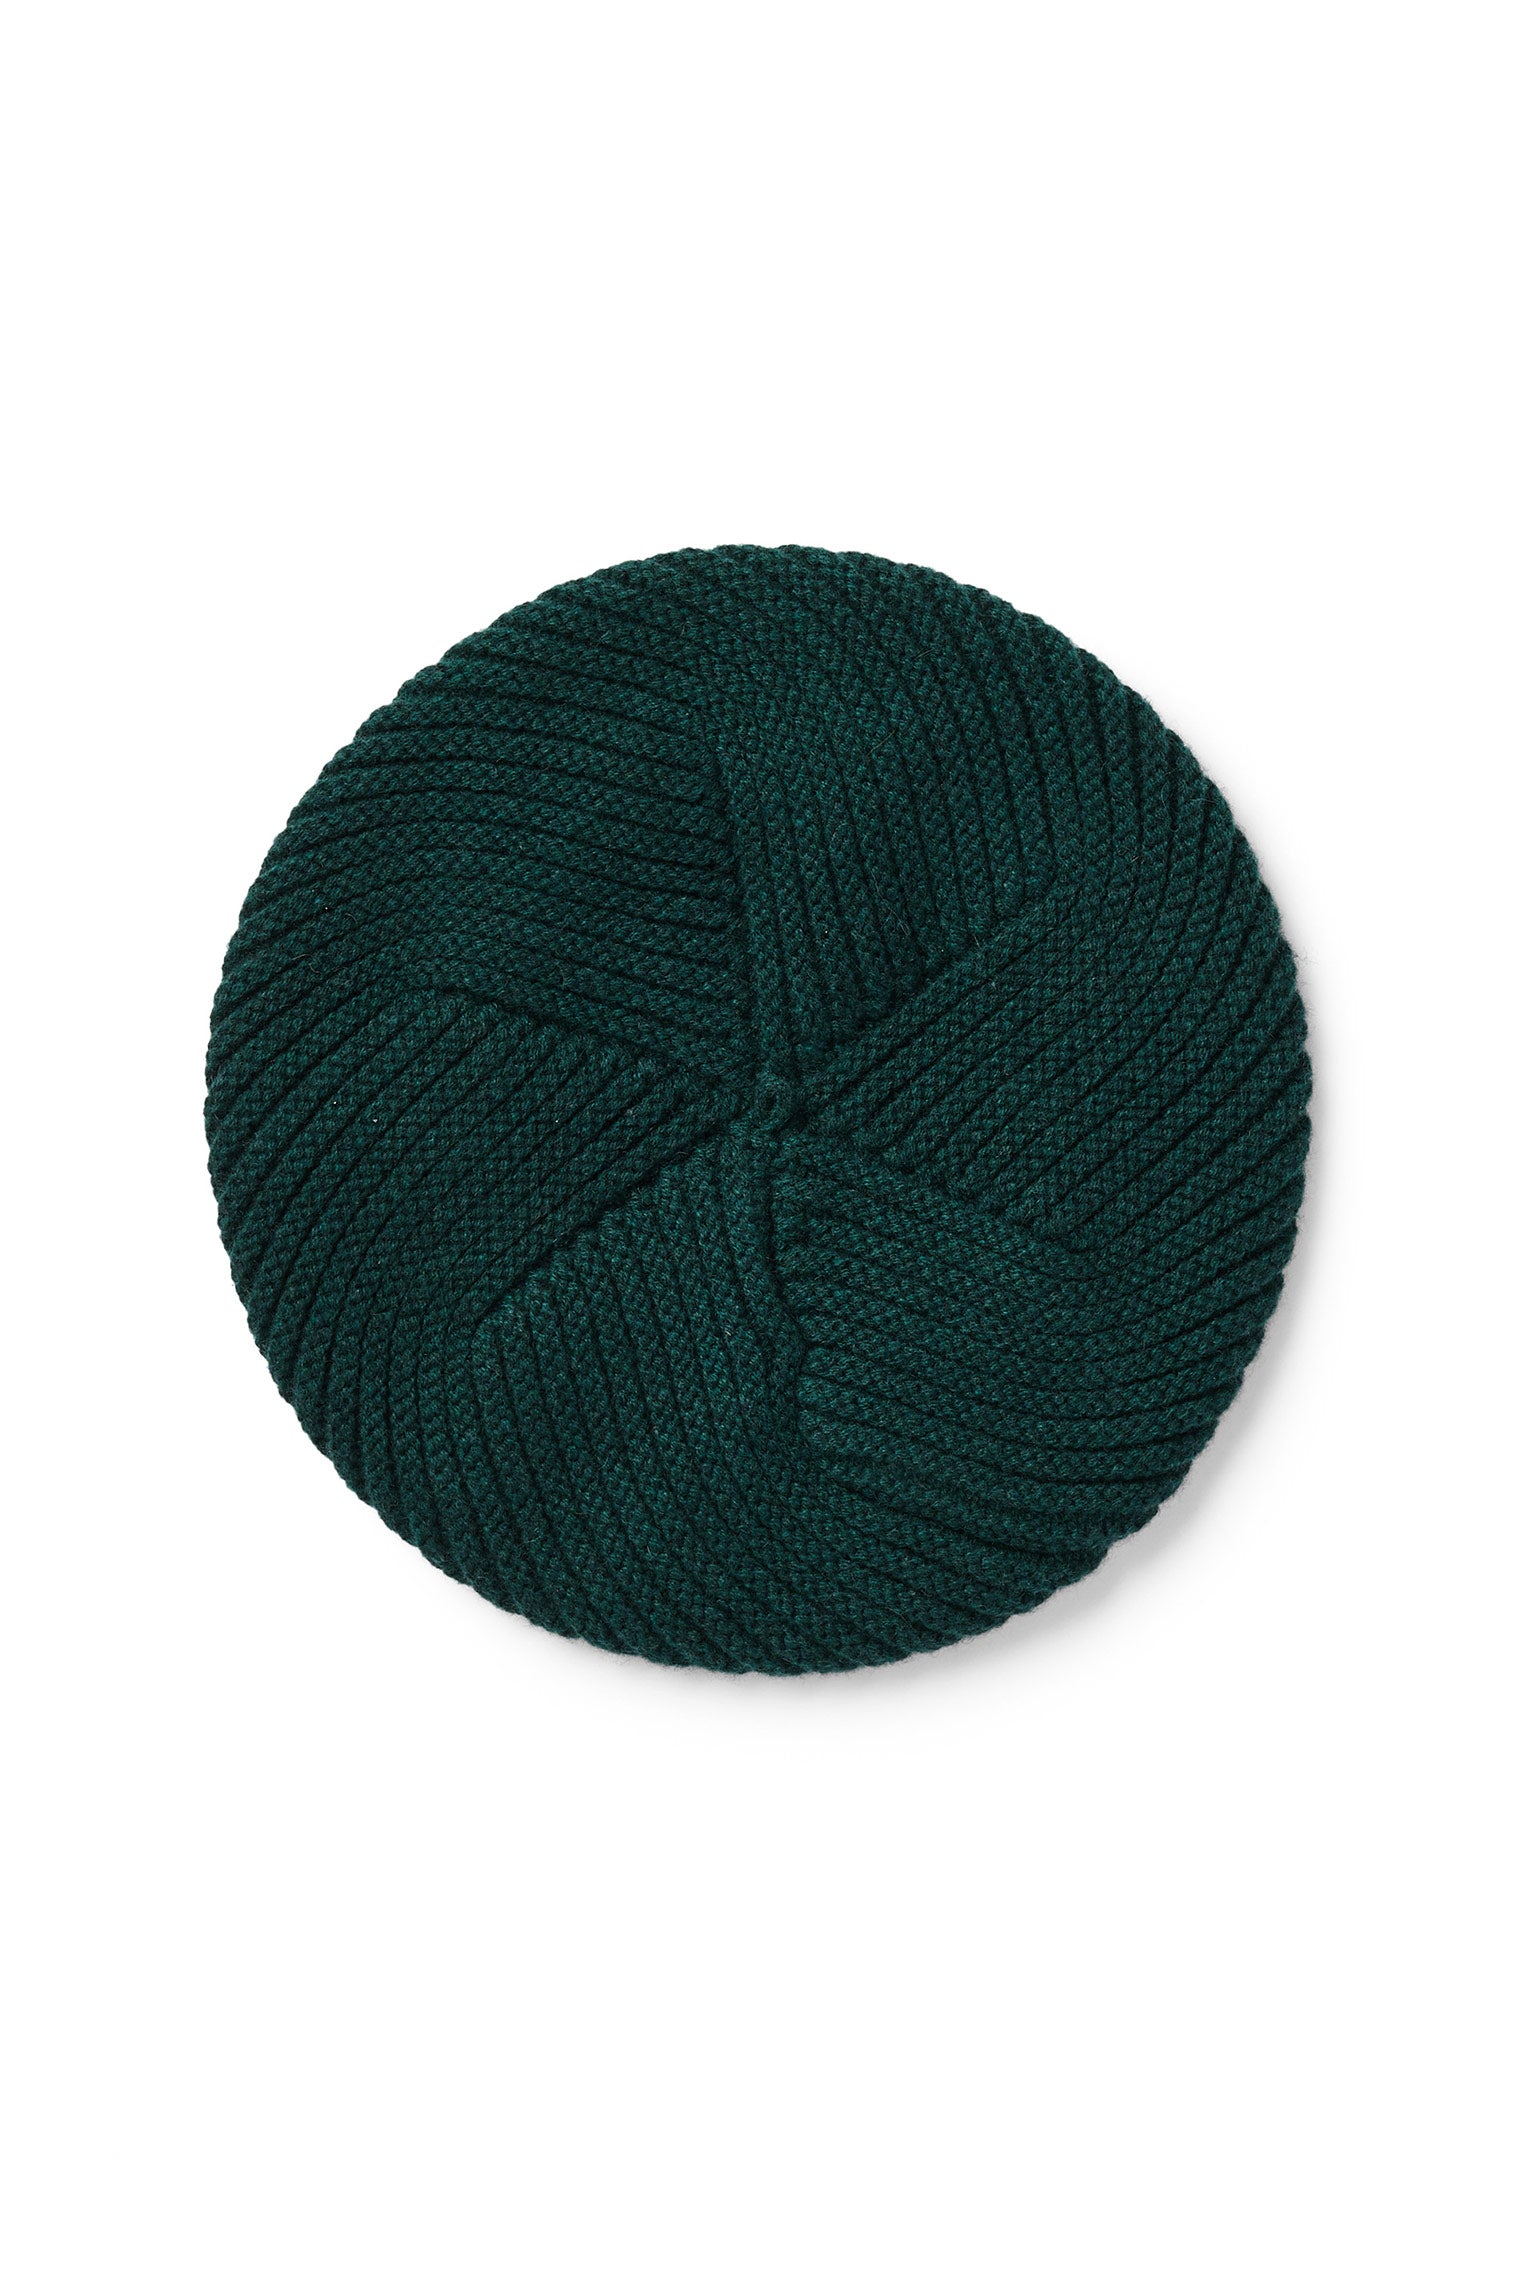 Green Knitted Cashmere Beret -  - Lock & Co. Hatters London UK